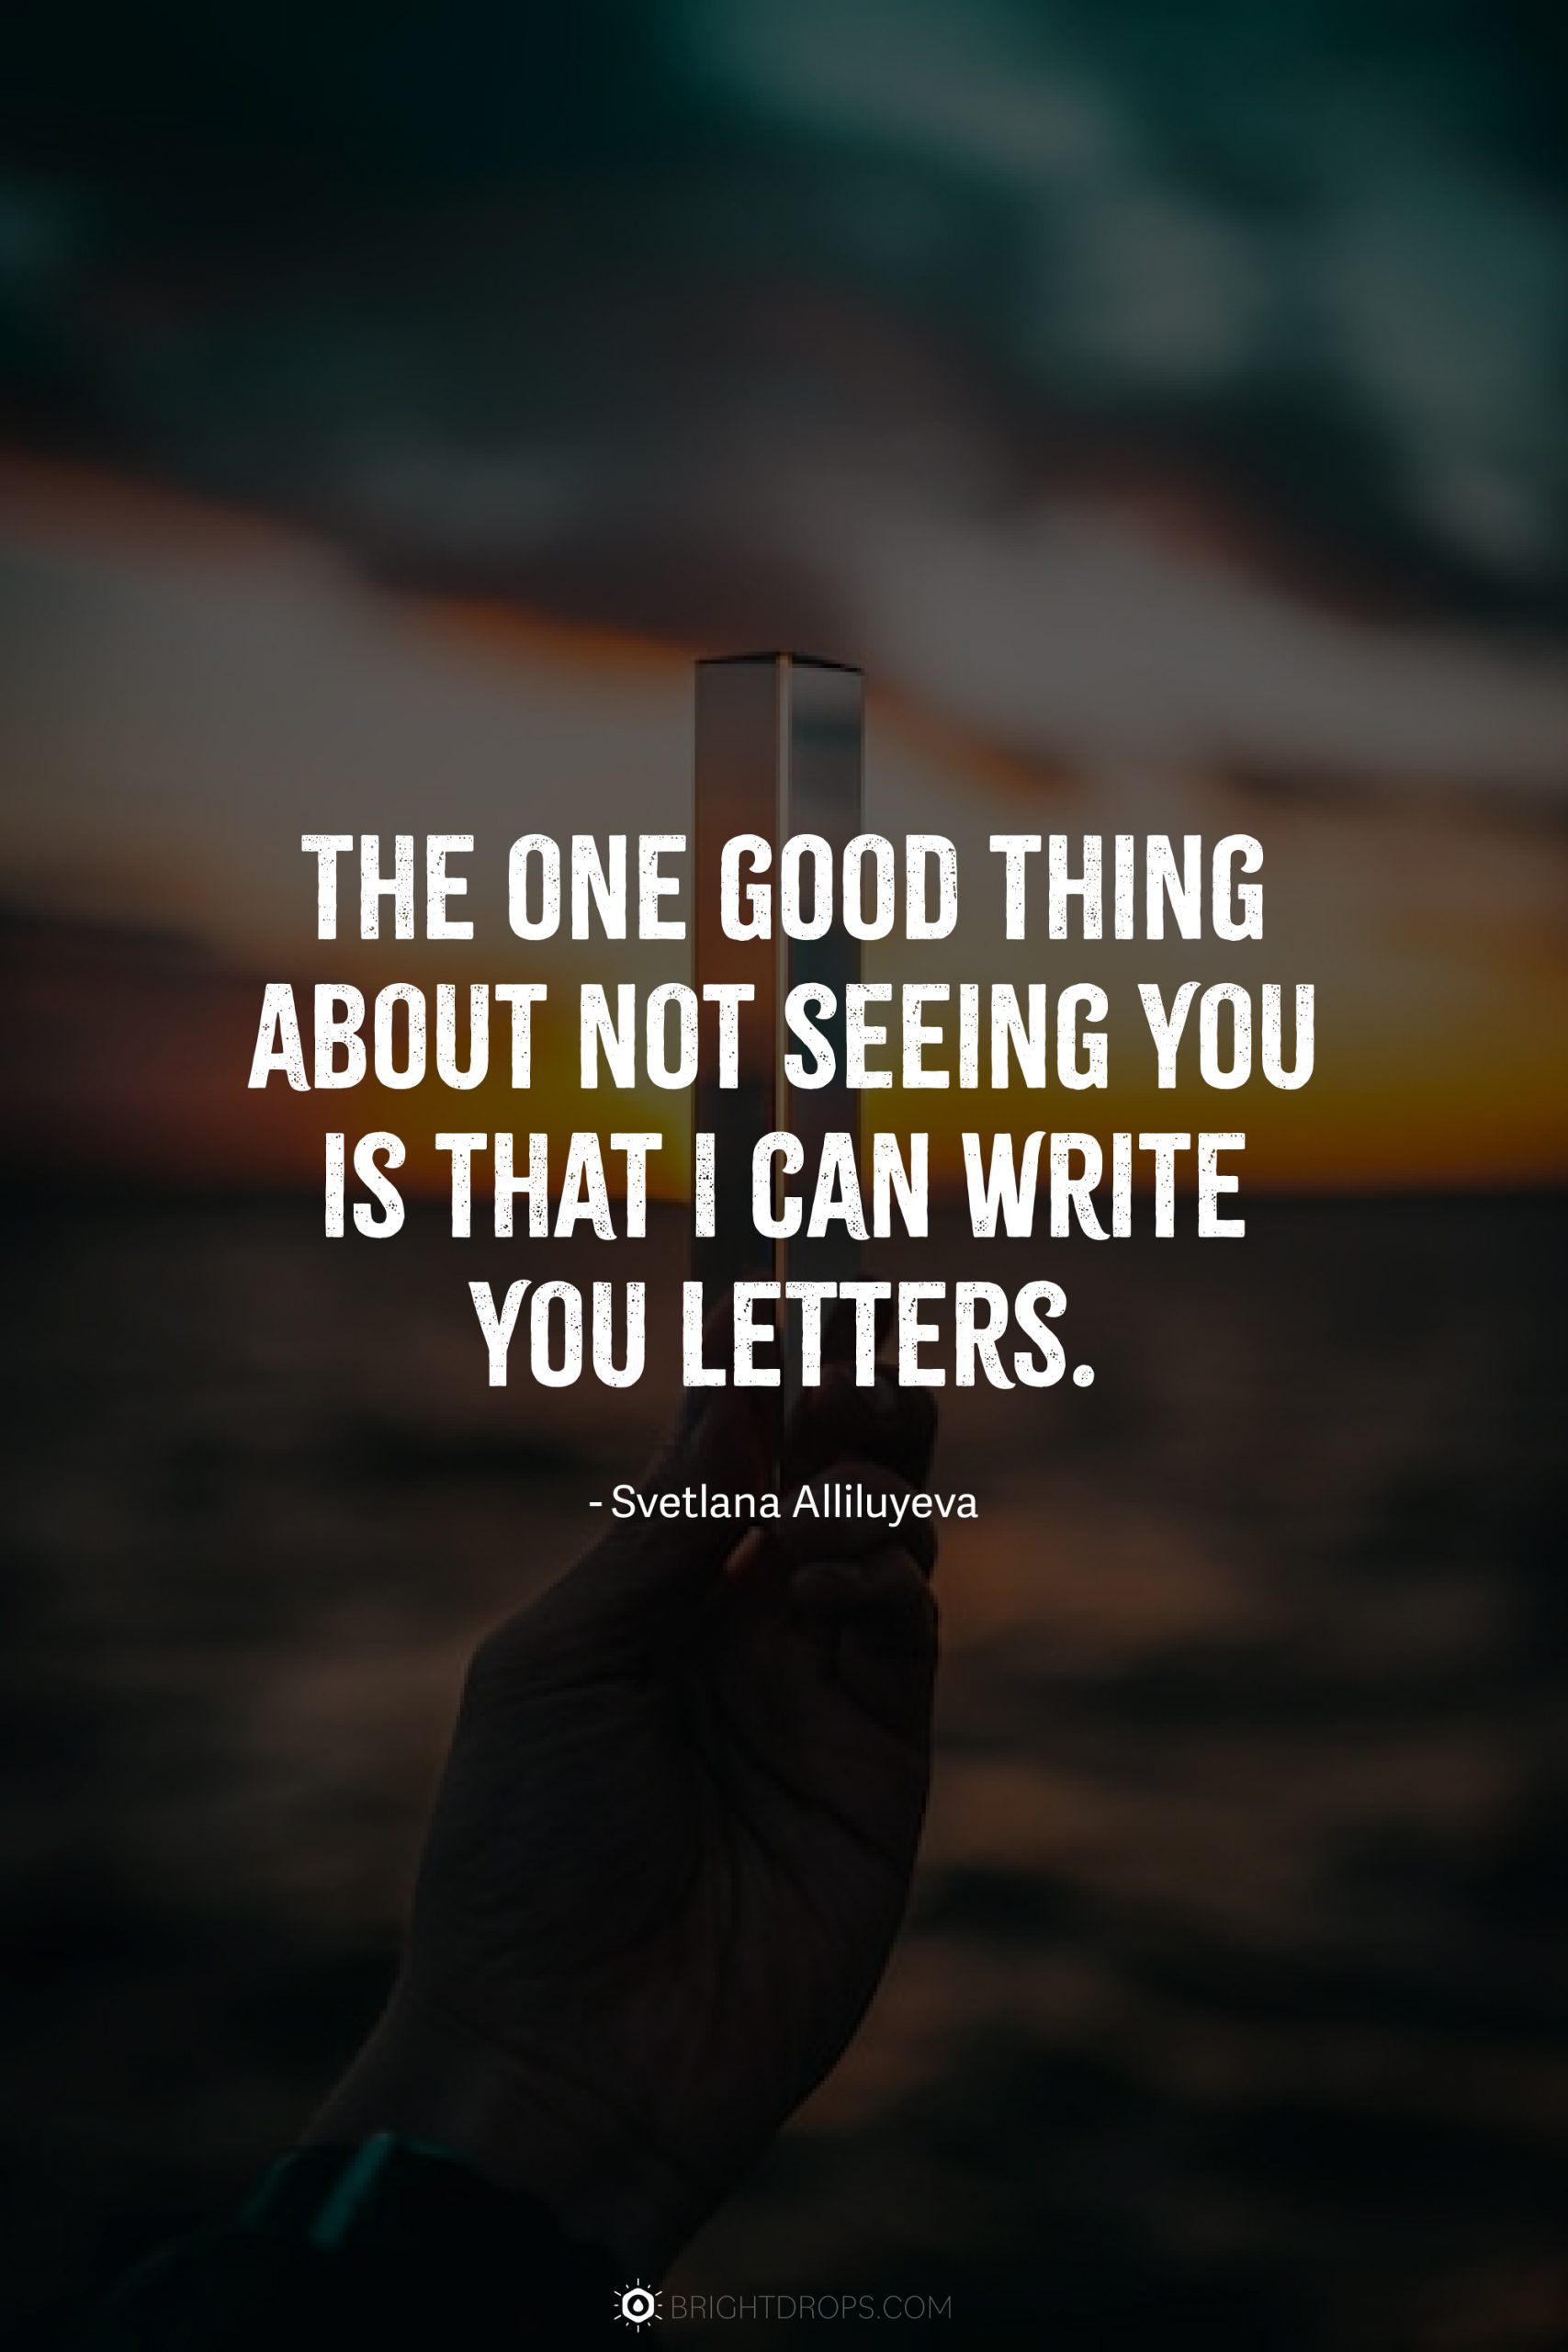 The one good thing about not seeing you is that I can write you letters.